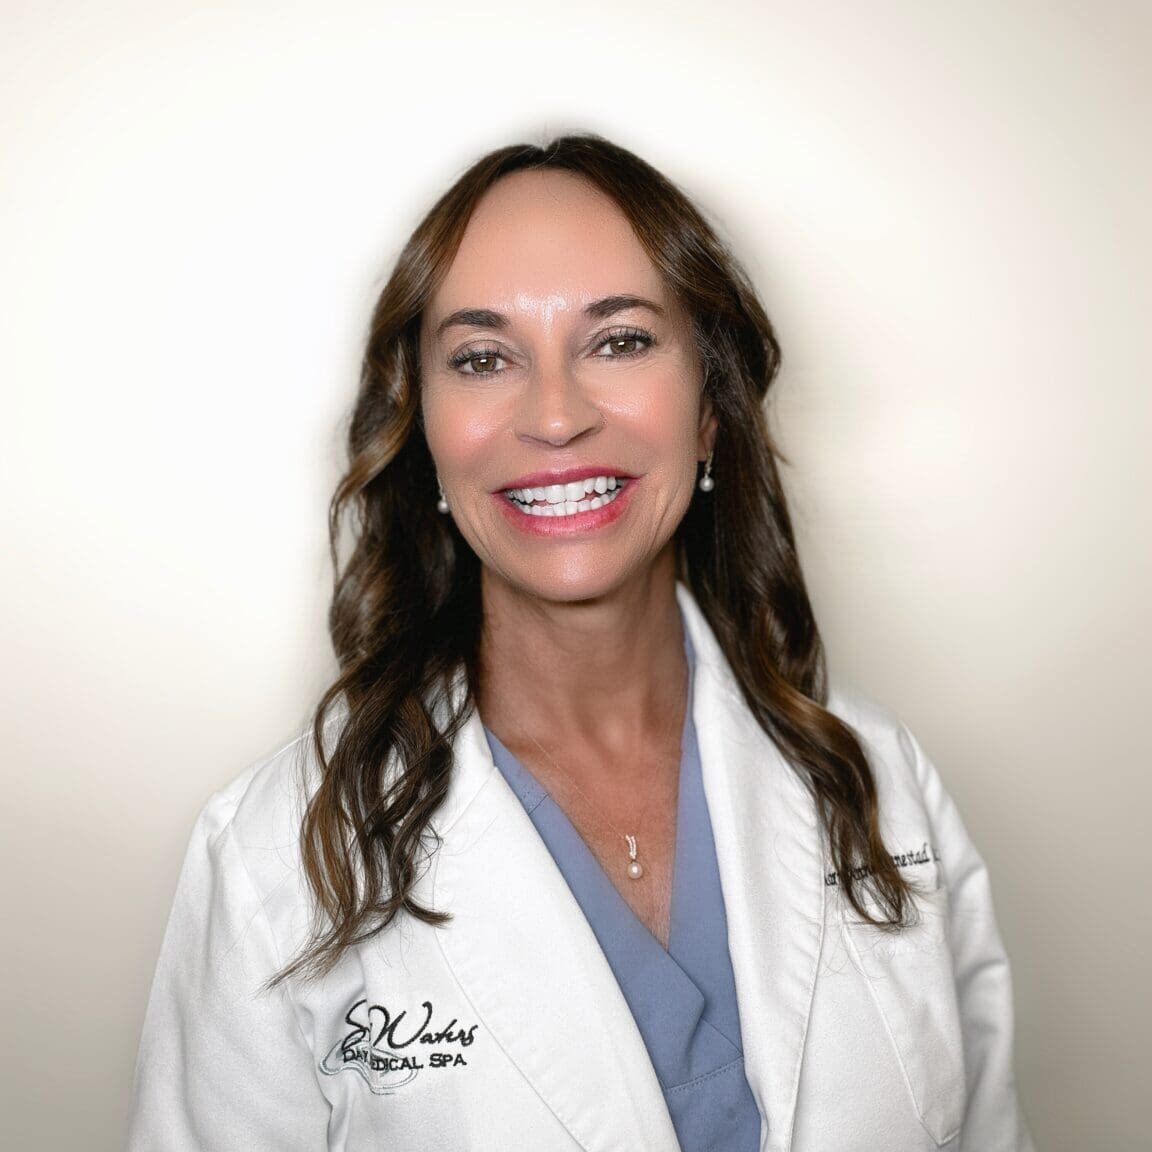 A woman in white coat smiling for the camera.